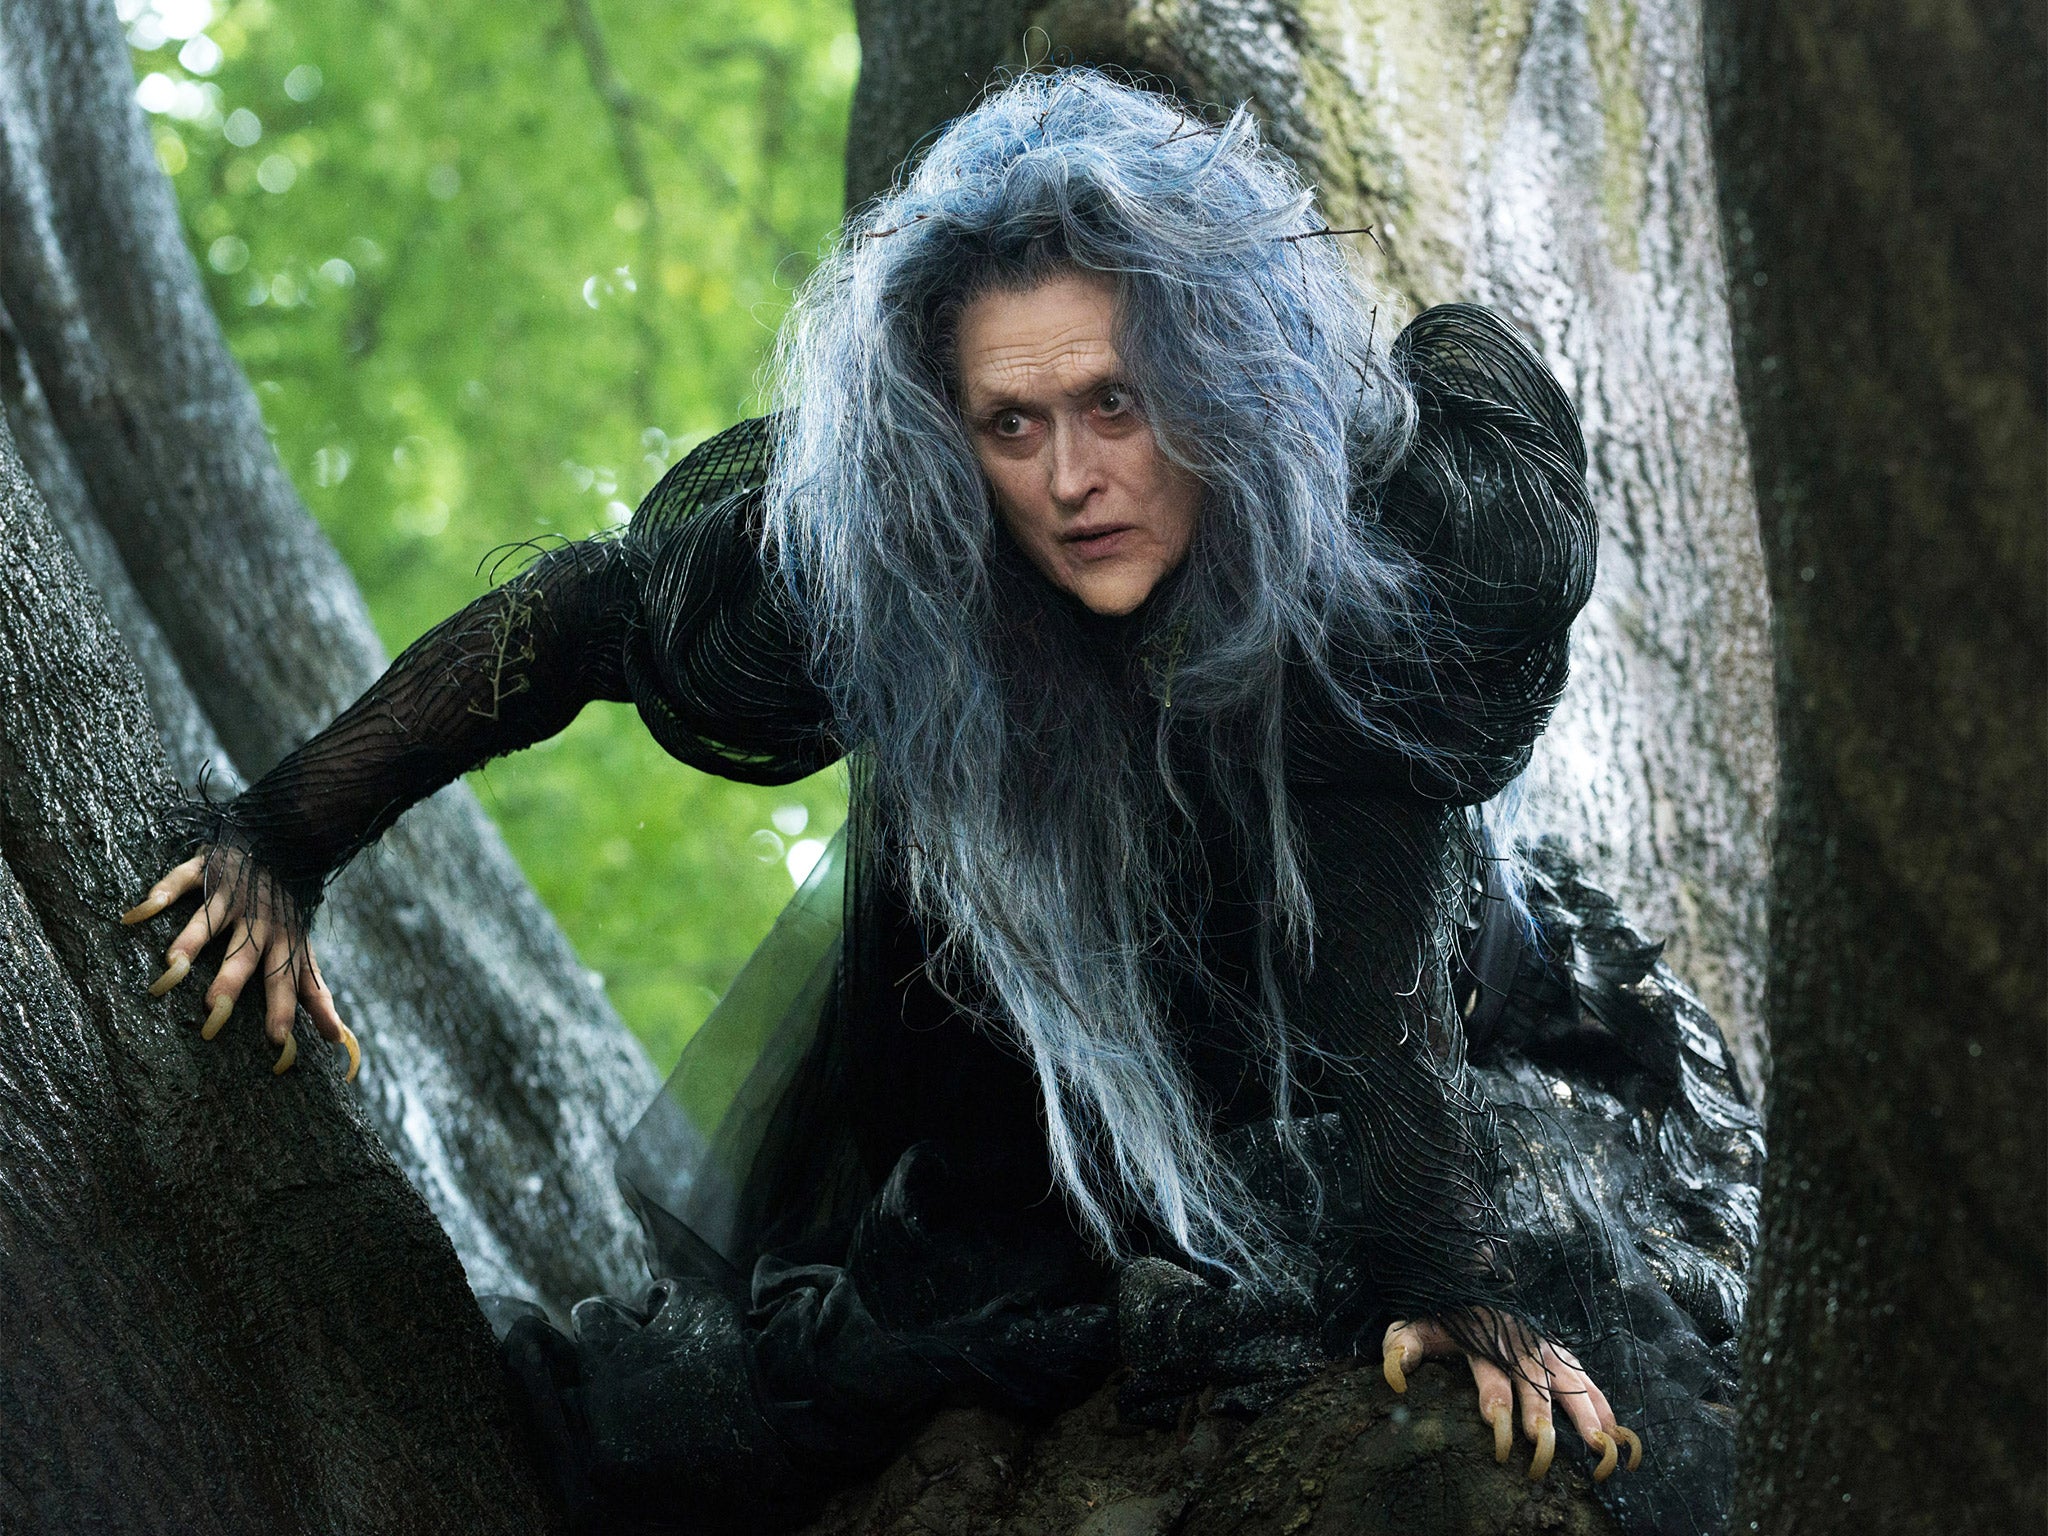 Meryl Streep is on top form as the Witch in Into the Woods